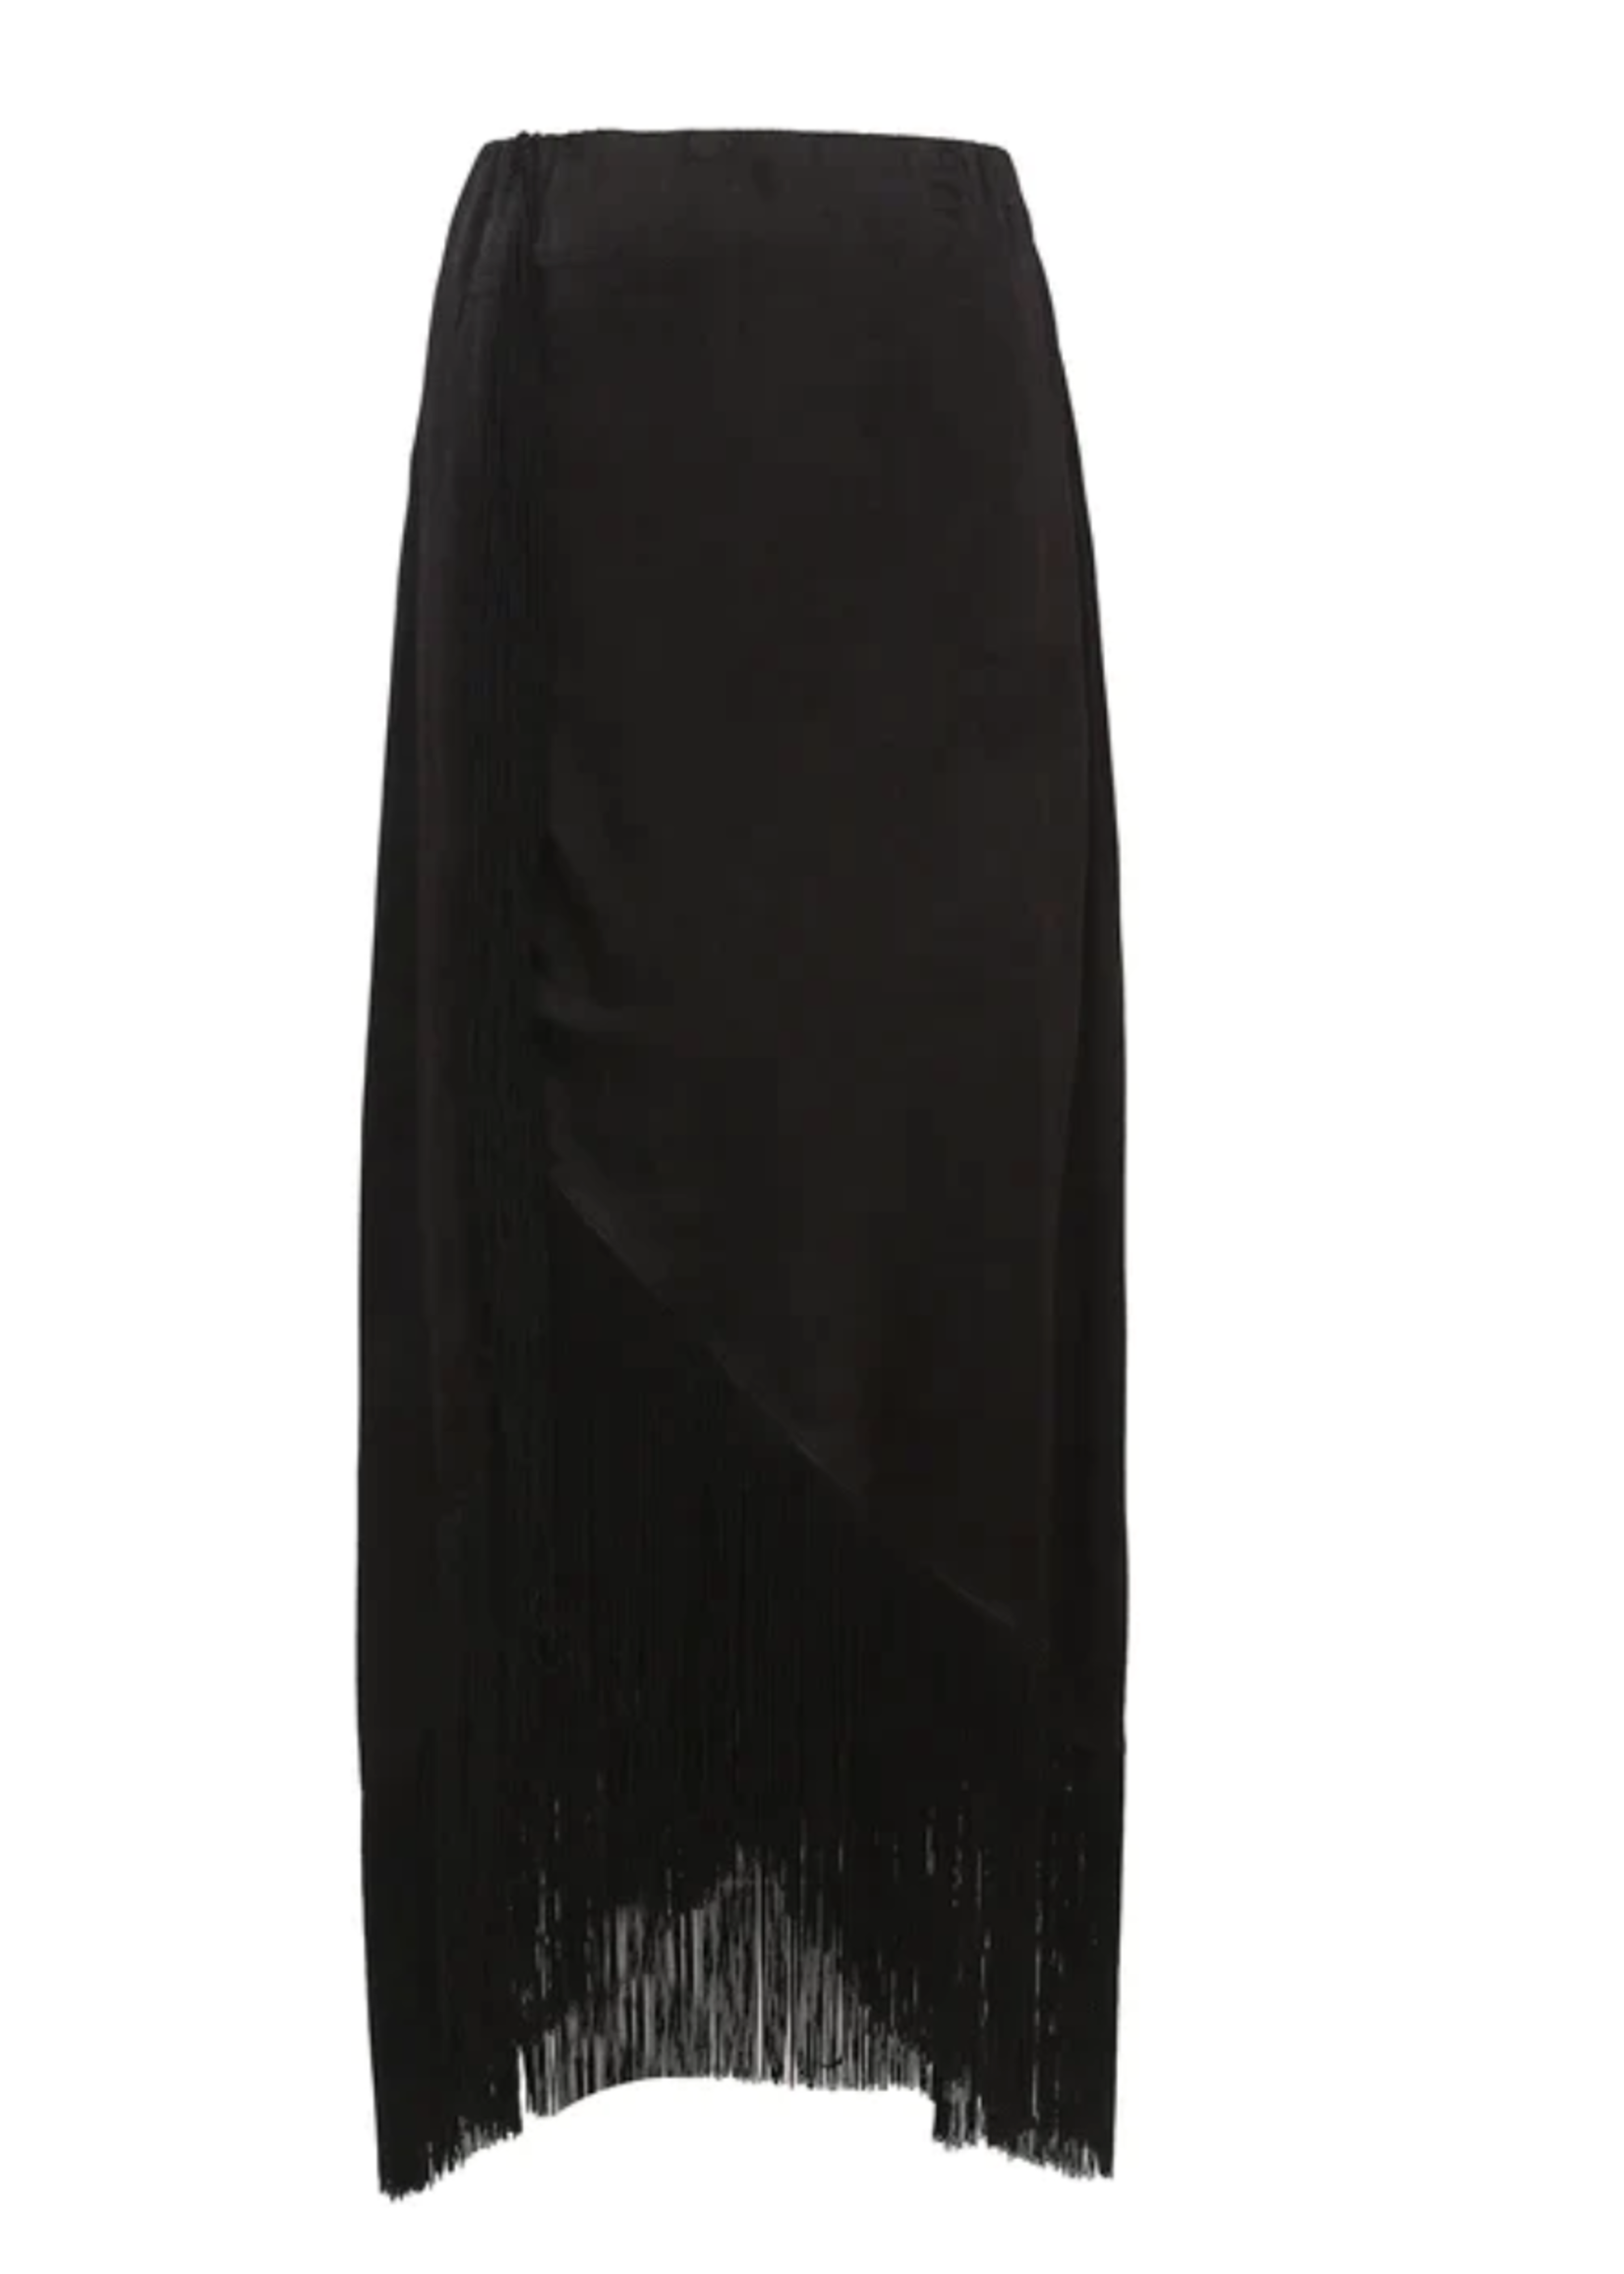 Elitaire Boutique Cecylia Woven Skirt in Black